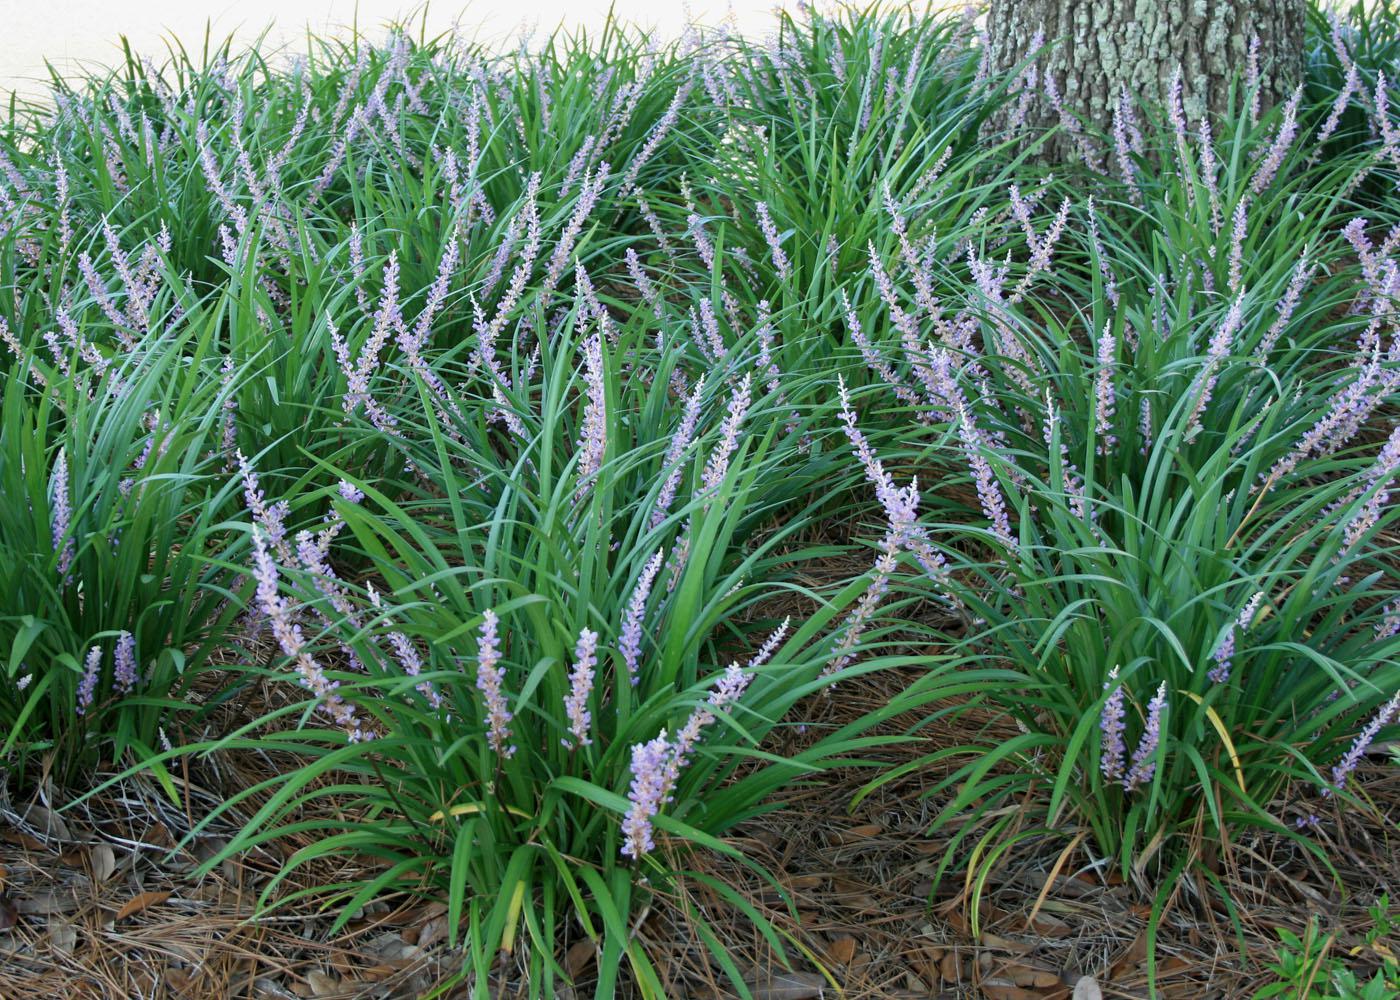 Liriope thrives in full sun or shade, providing a versatile groundcover under trees or a soft border for paved areas and foundations. Flowers may be purple, lavender or white, and they bloom from July to the end of August. (Photo by Gary Bachman)